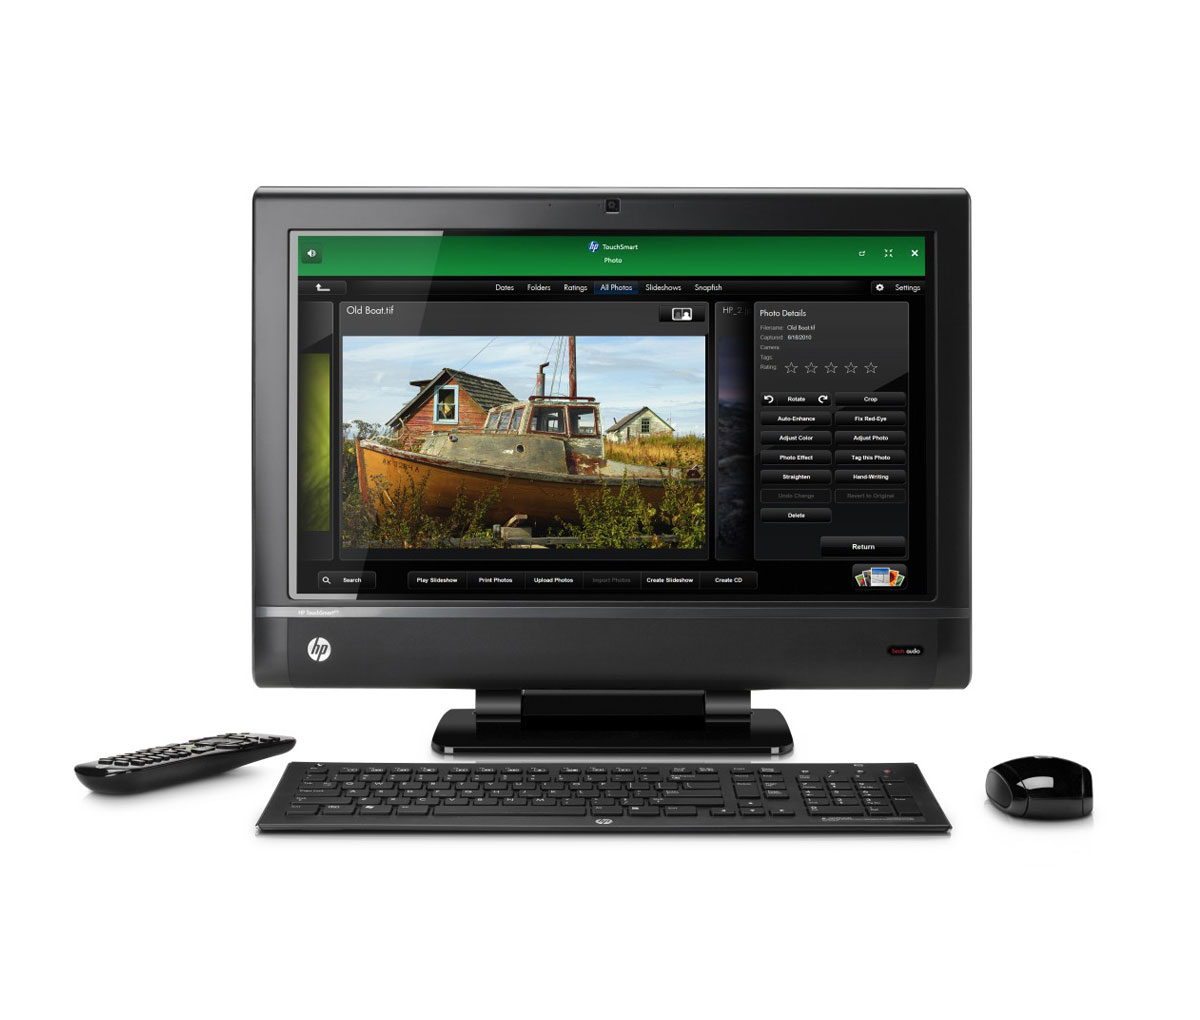 HP TouchSmart 610-1150f PC Front View